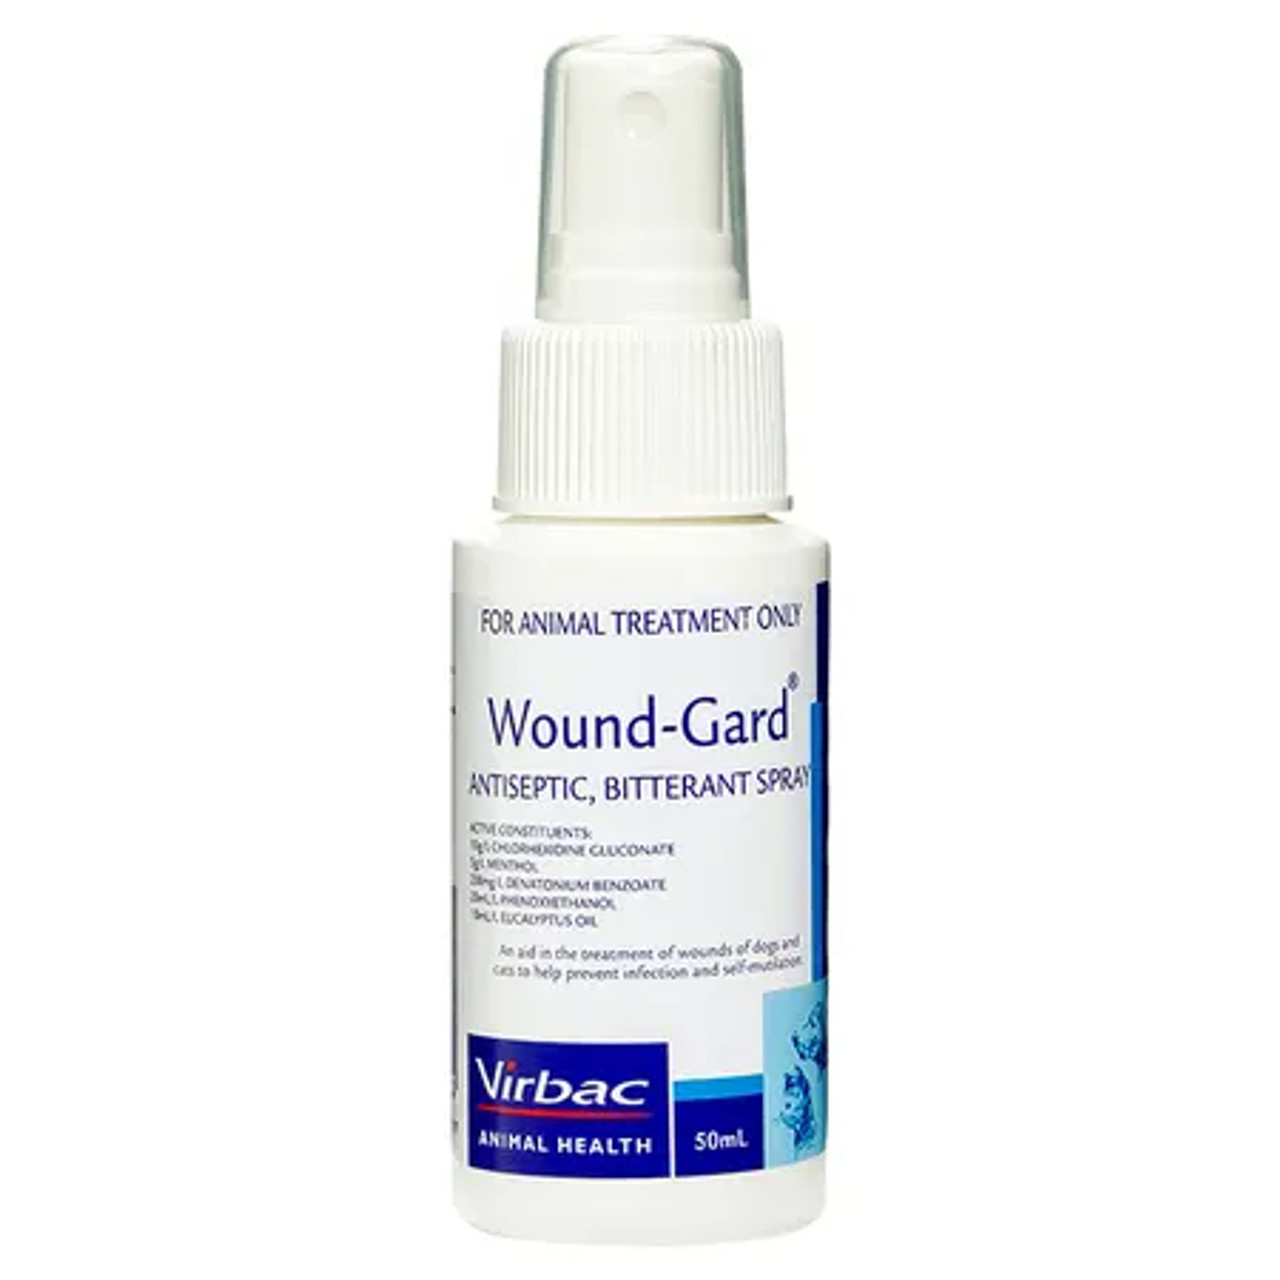 20% Off Virbac Wound-Gard Antiseptic Spray For Cats & Dogs 50mL (1.69 oz) at Atlantic Pet Products